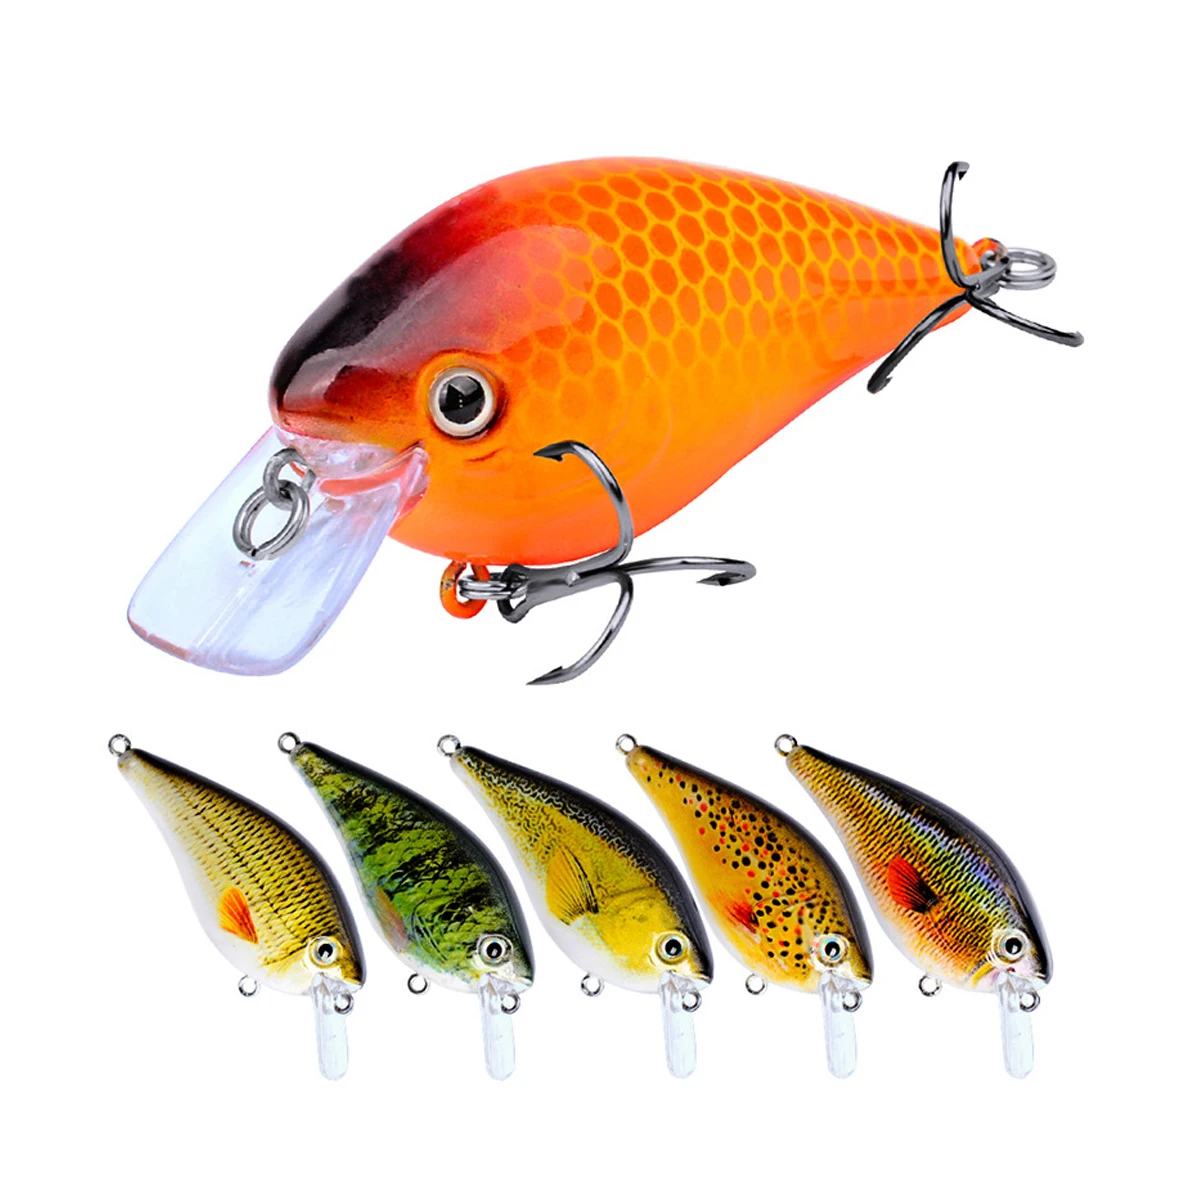 

Crankbaits Fishing Lure 76mm 12.75g Hard Body Swimbaits Boat Ocean Topwater Fishing Tackle Hard Baits for Trout Bass Perch